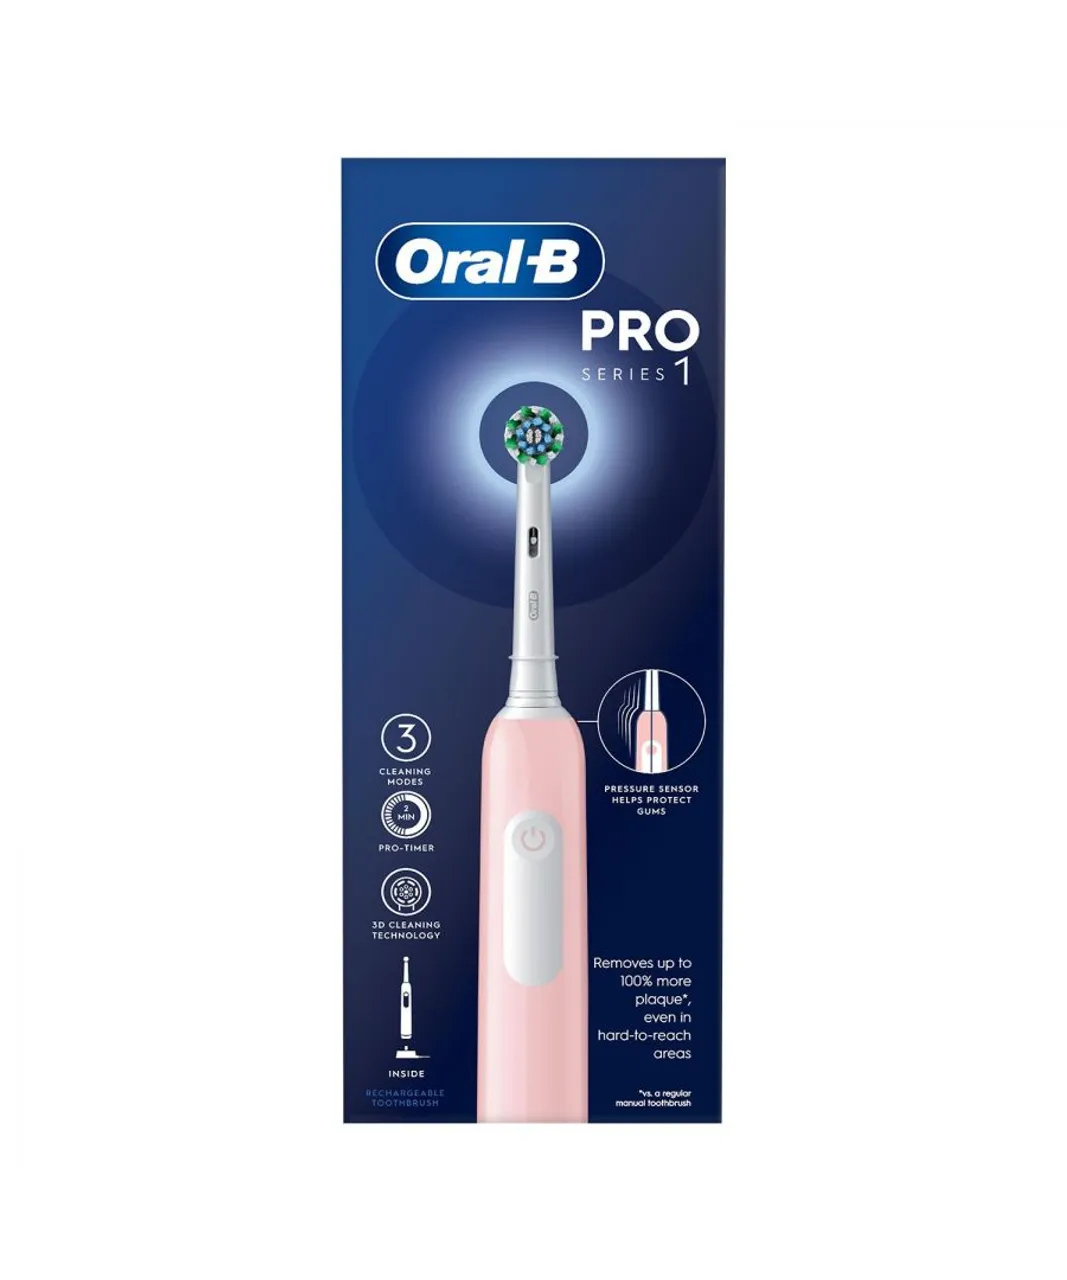 Oral B Unisex Oral-B Pro 1 Cross-Action Electric Rechargeable Toothbrush with 3 Modes, Pink - One Size